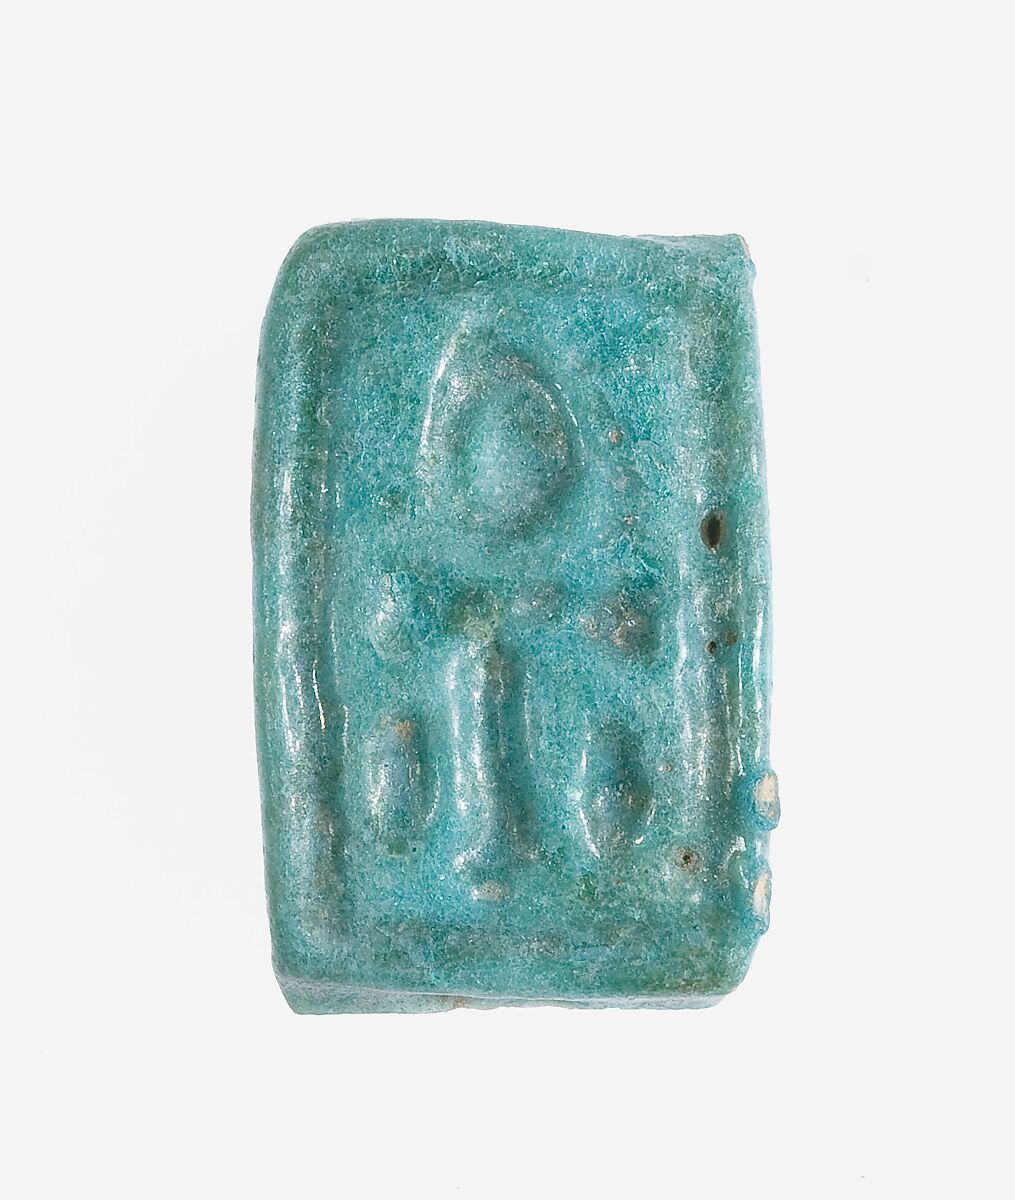 Ring Fragment Inscribed with an Ankh, Faience 